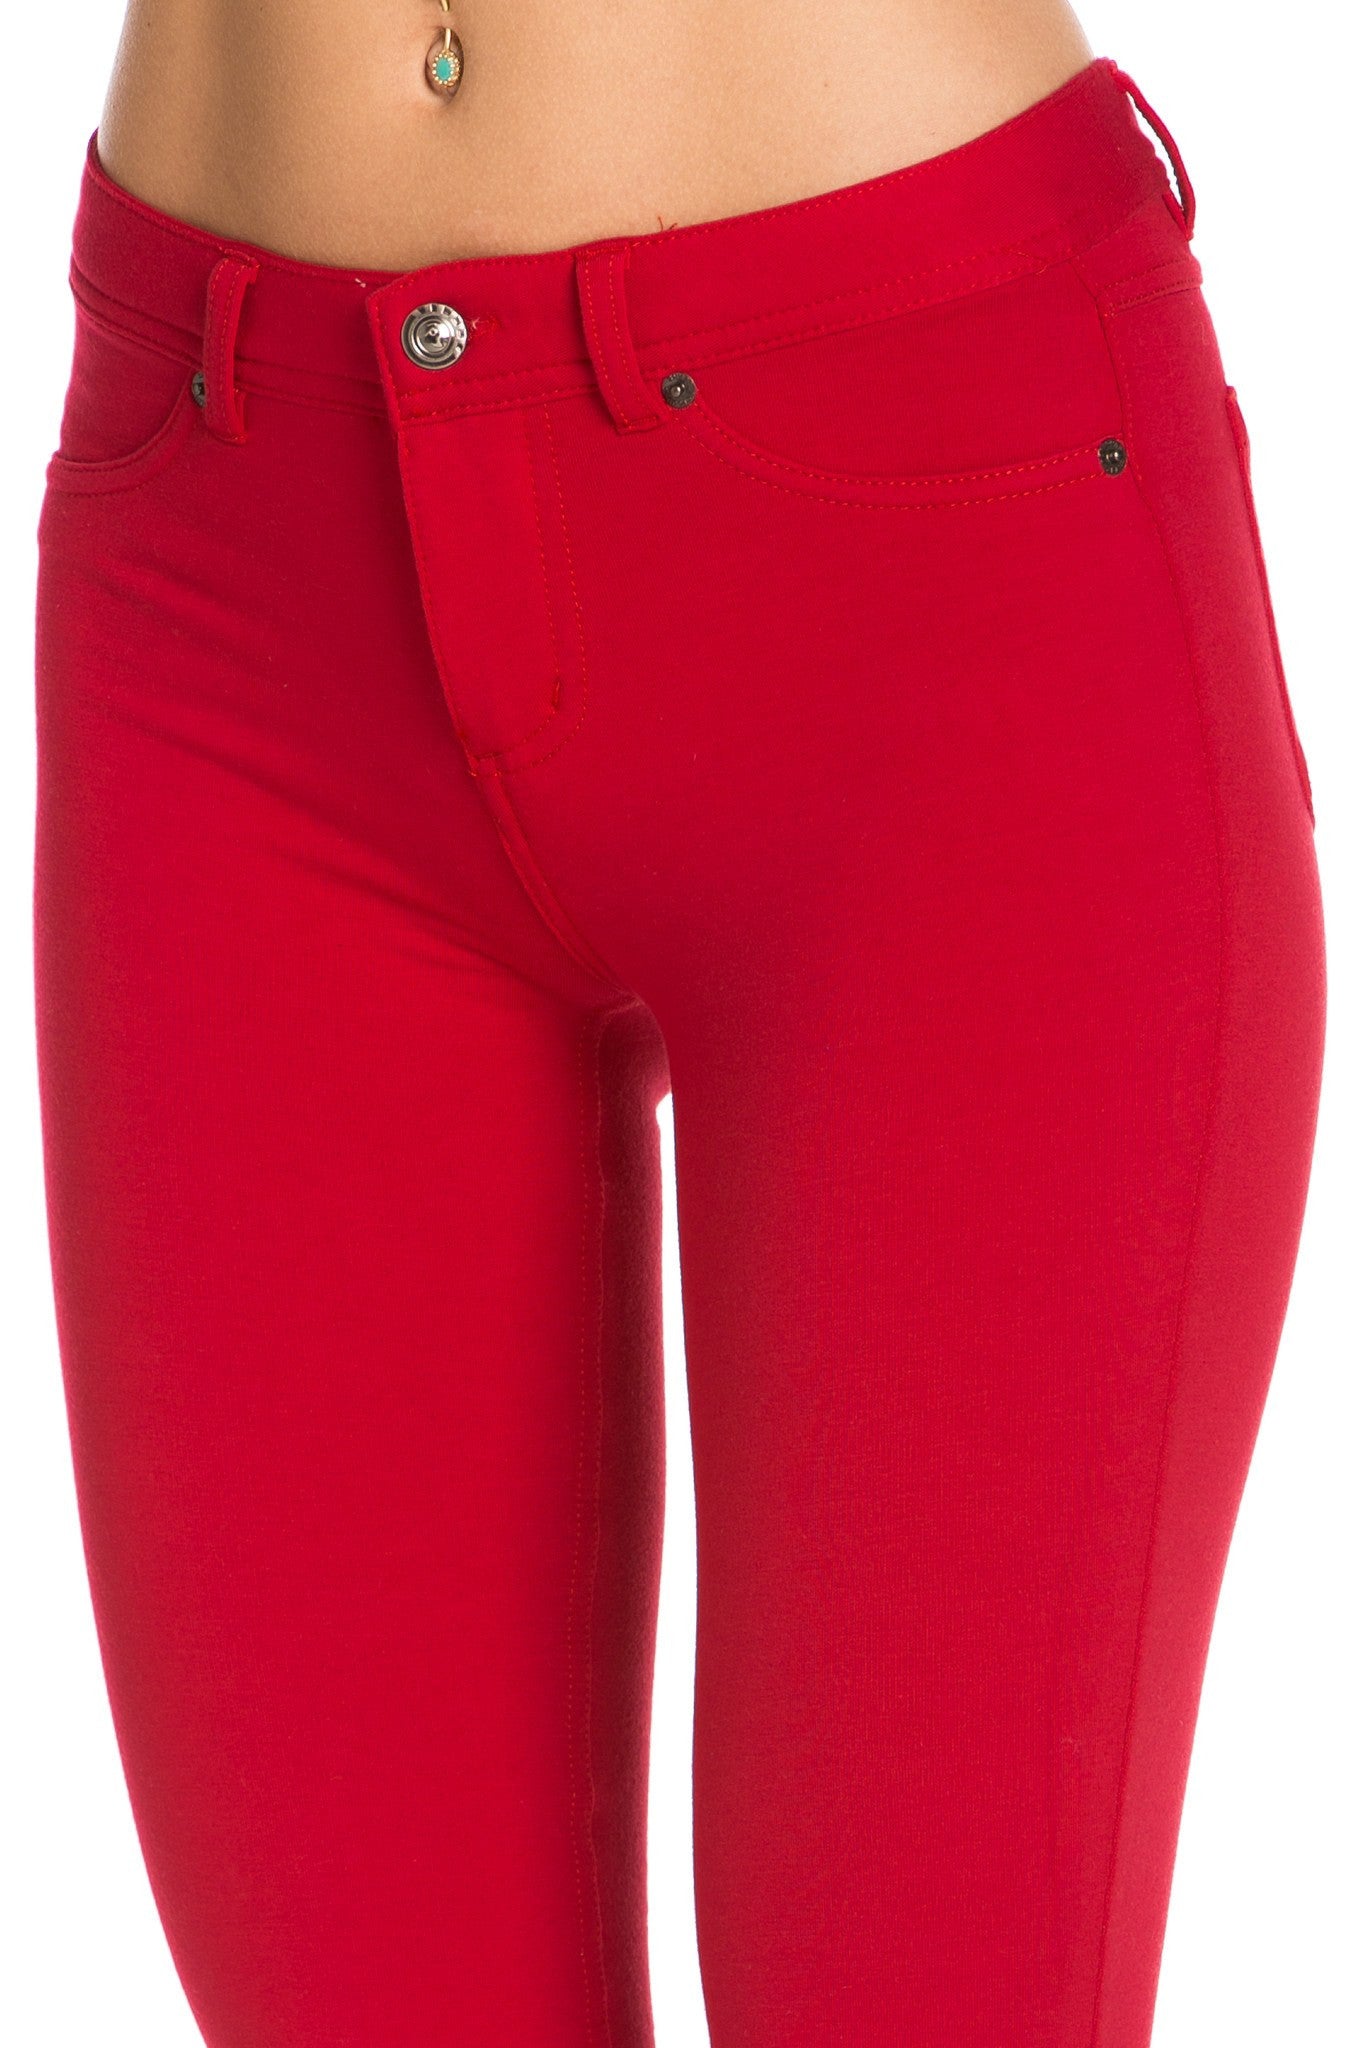 Poplooks Women's Casual Mid Rise Stretch Skinny Knit Jegging Pants (Red)